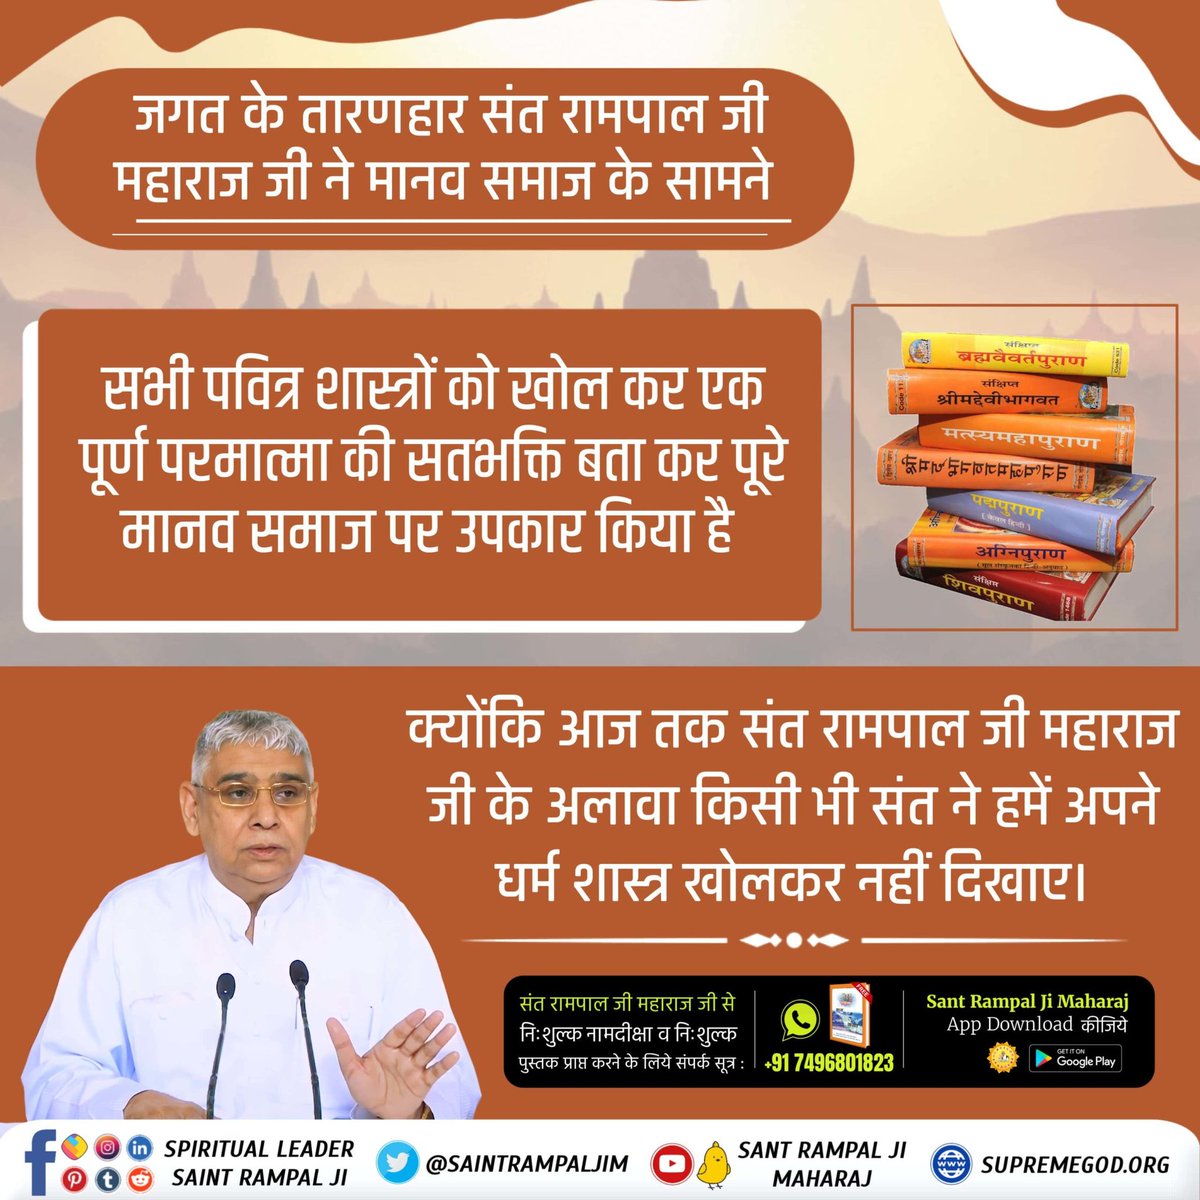 According to the spiritual knowledge given by Sant Rampal ji Maharaj, people are quitting their addiction to intoxicants, stopped taking bribes or corruption oriented activities, do not indulge in adultery and so on. - Saviour Of The World #जगत_उद्धारक_संत_रामपालजी